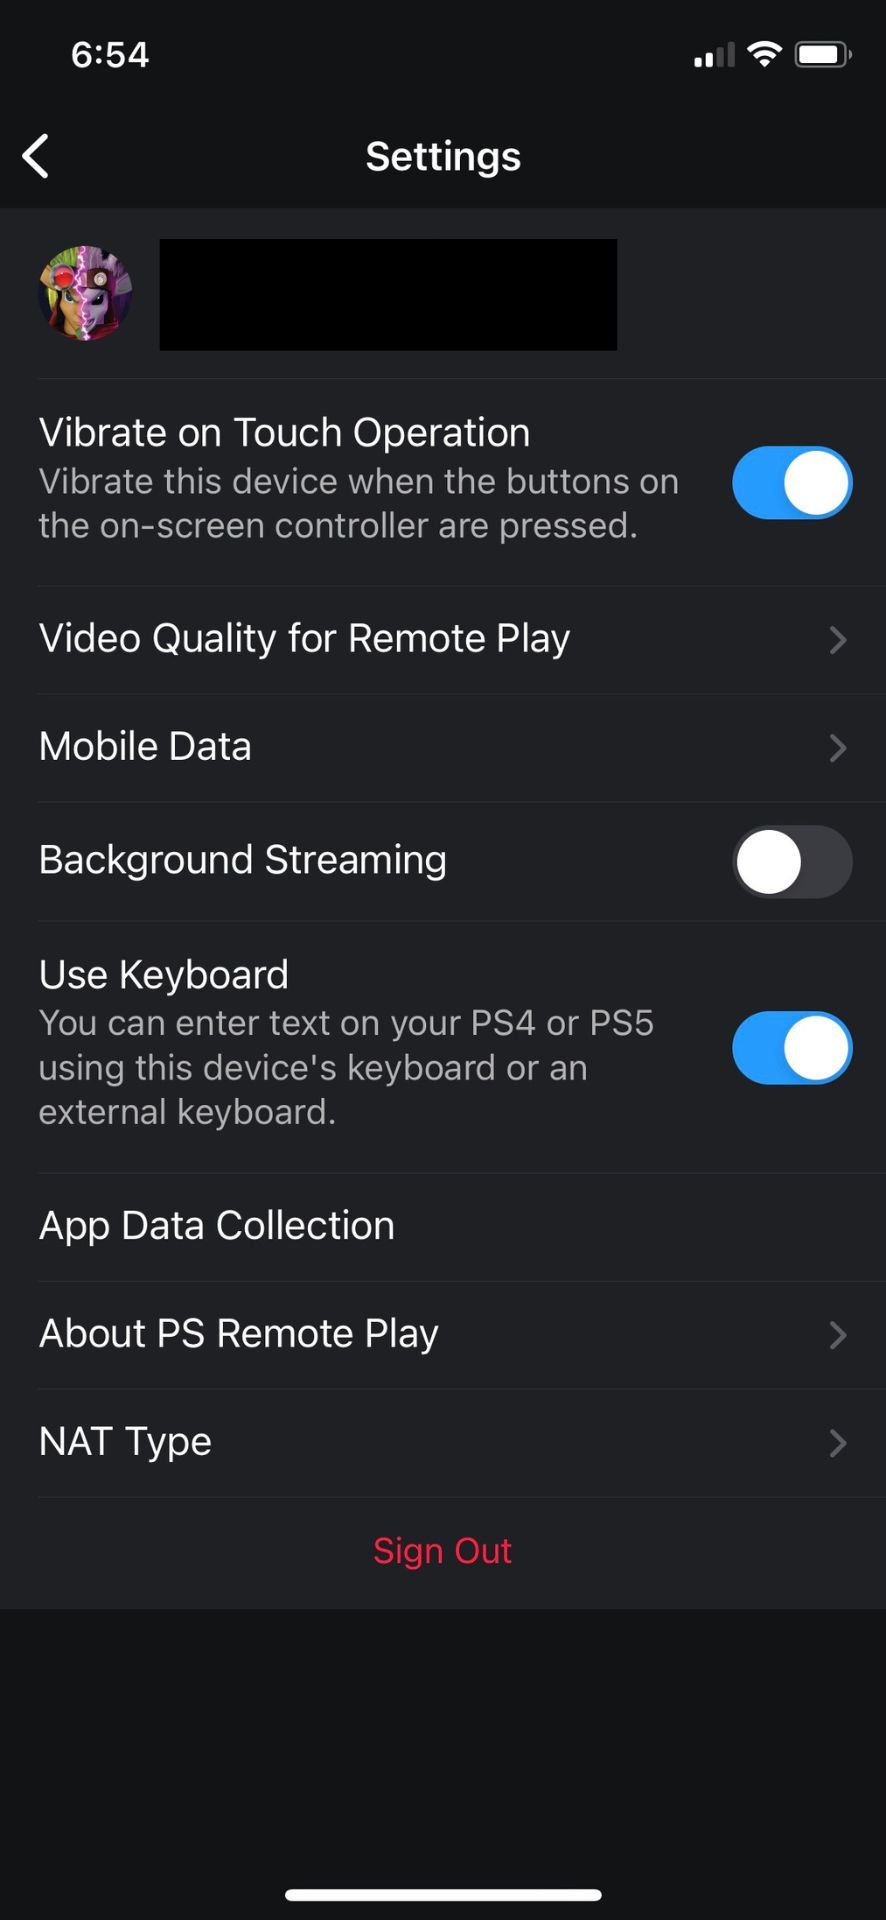 Setting up ps remote play on mobile device change mobile data settings